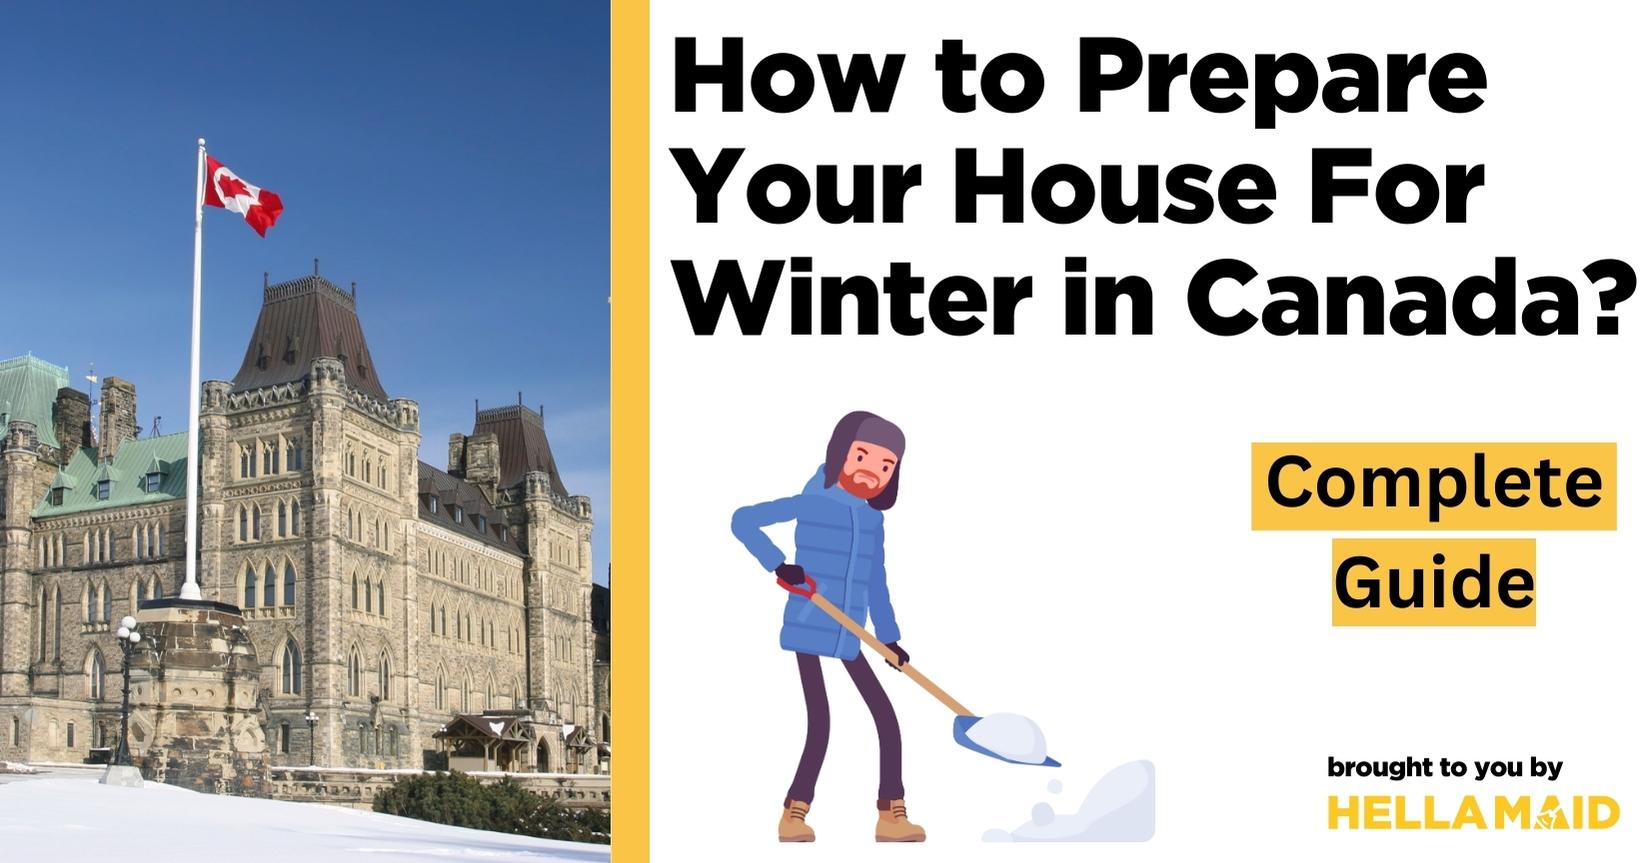 Welcome to Canadian winter: Preparing for winter storms and